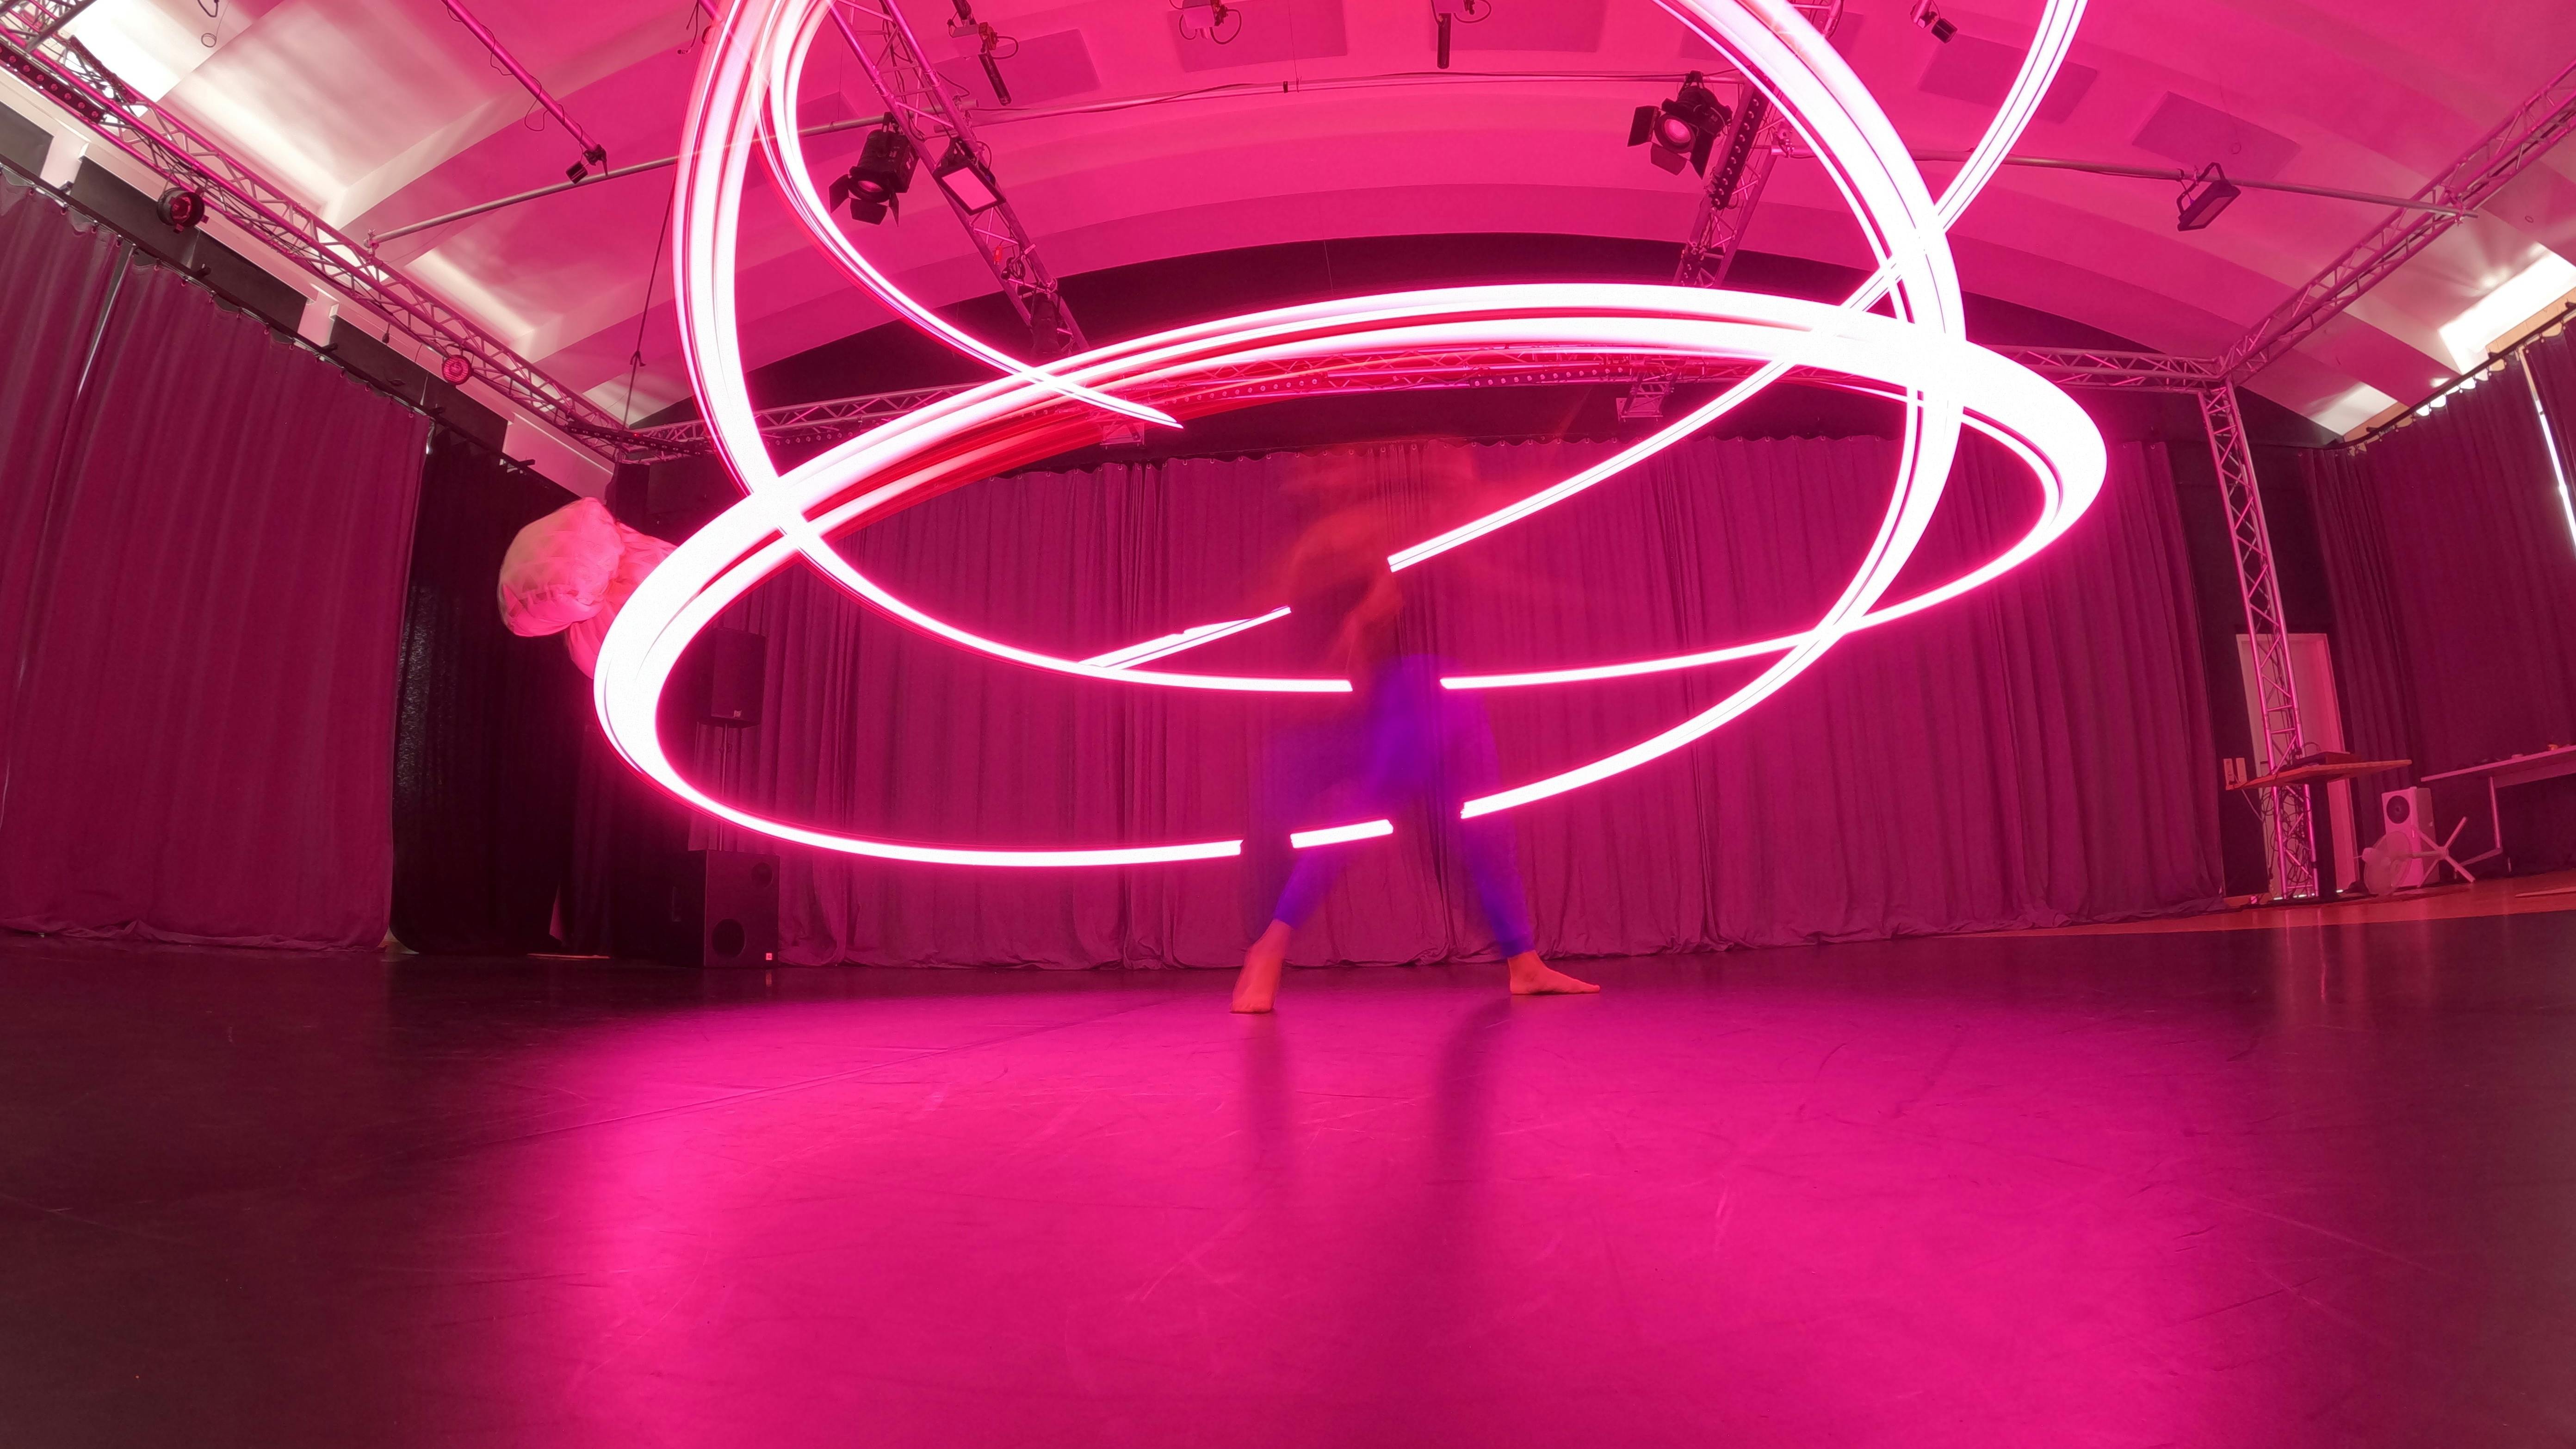 Lorenzo Morandini in motion with a pink LED lighting up the room